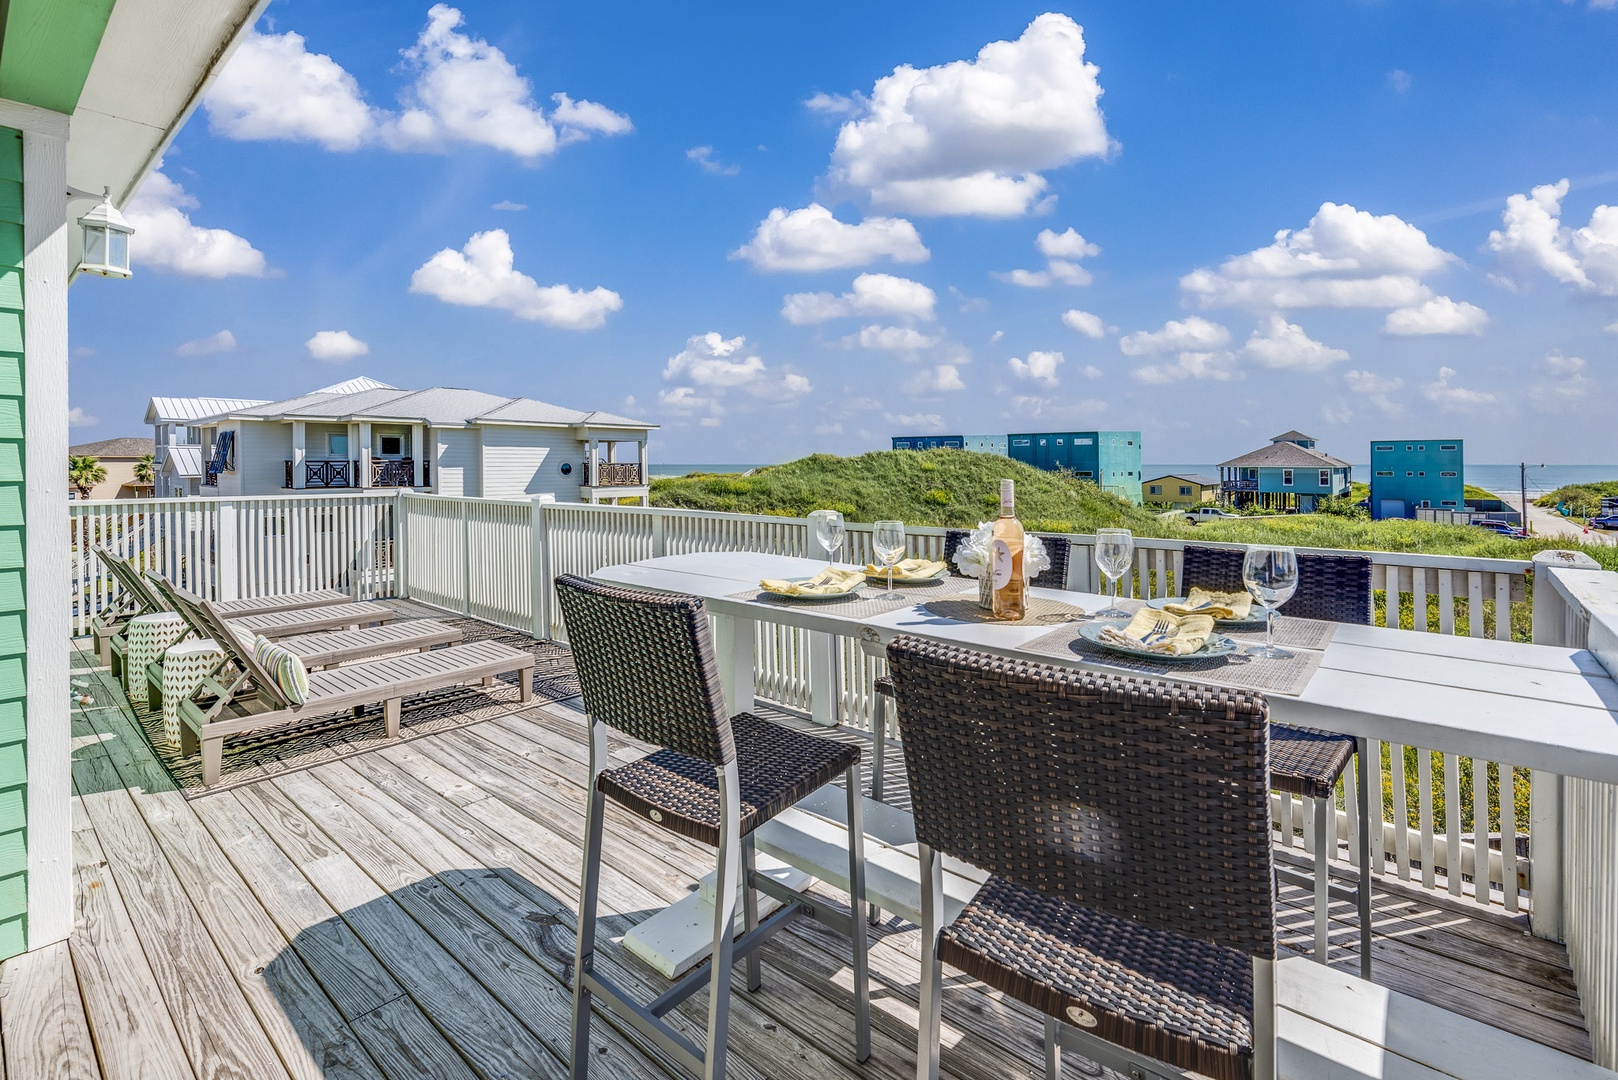 The 3rd Level Deck boasts sweeping area views and plenty of spaces to relax and dine